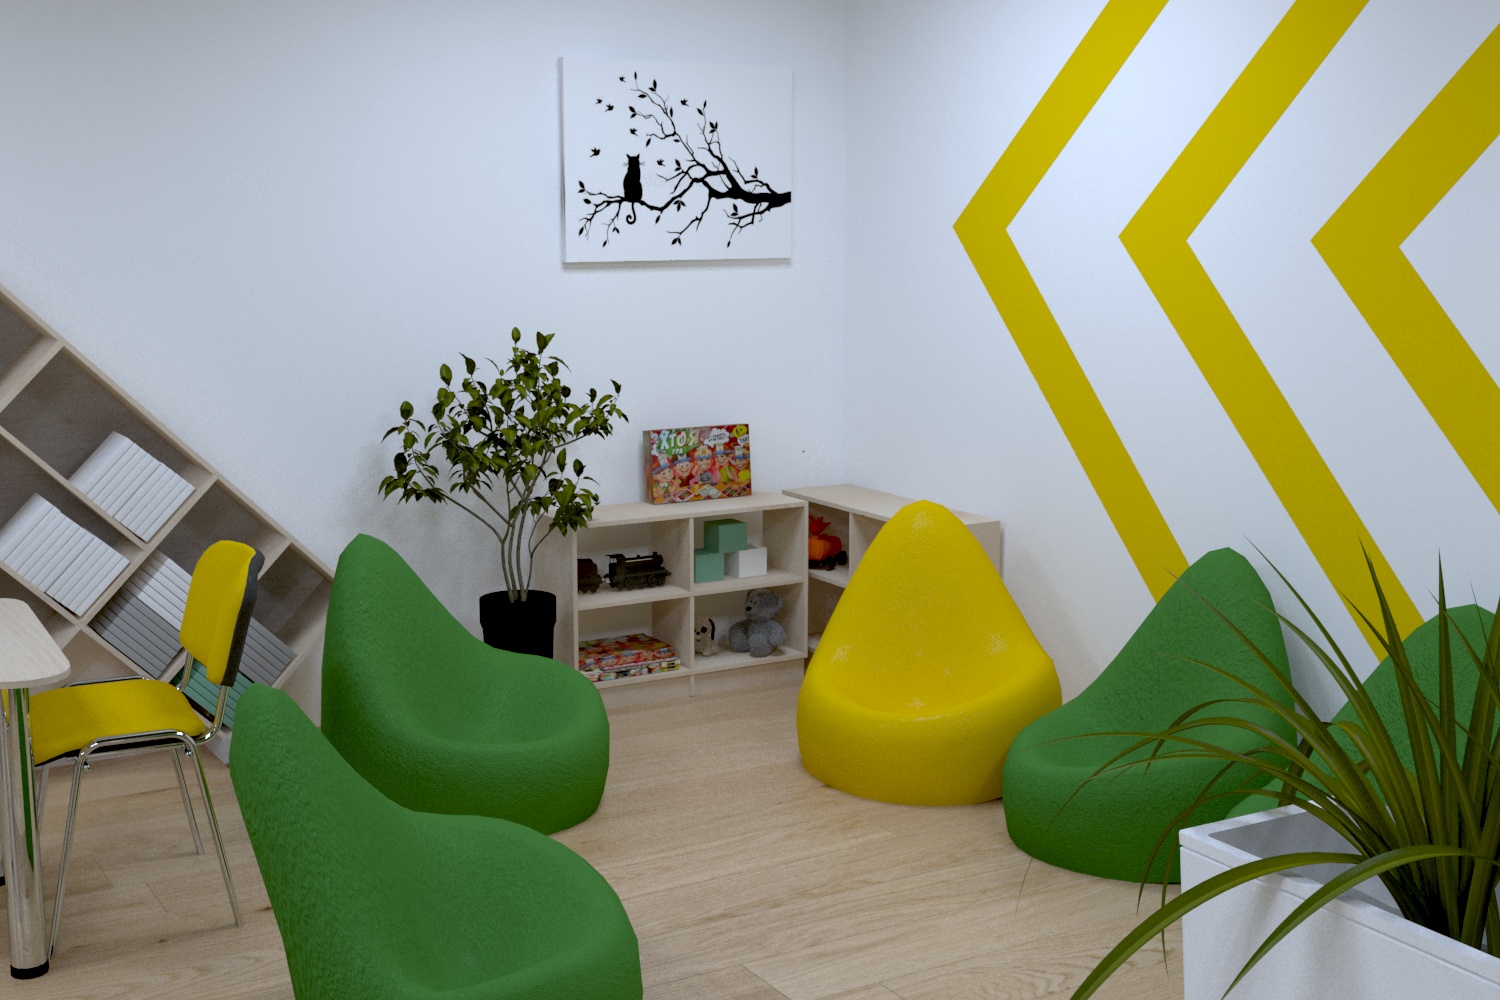 Media Library in 3d max vray 3.0 image